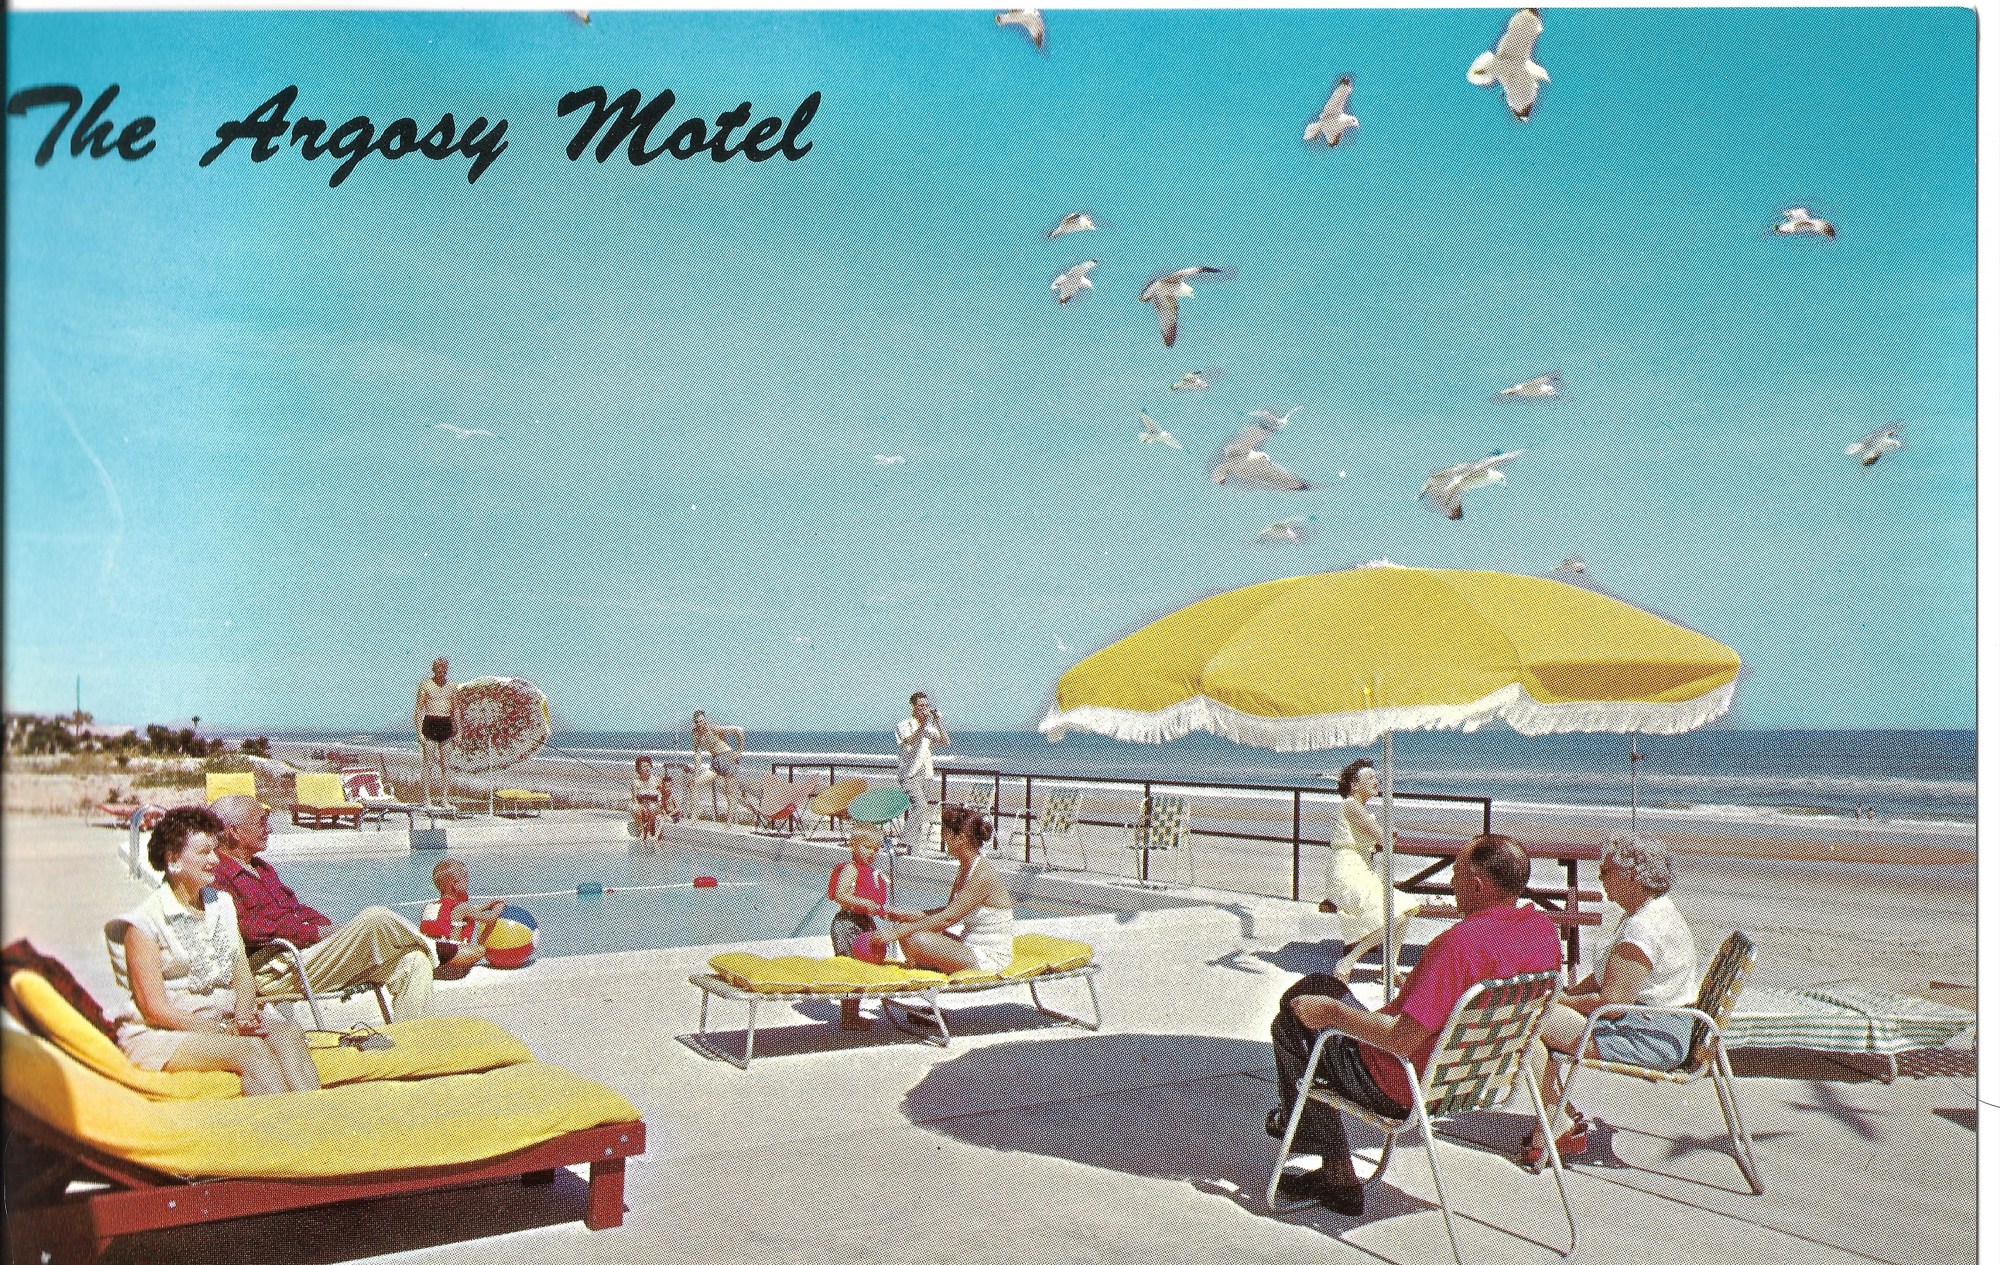 The Argosy Motel was built in 1953. In this postcard, Gregory Clark appears as the child with the beach ball by the pool. Courtesy photo